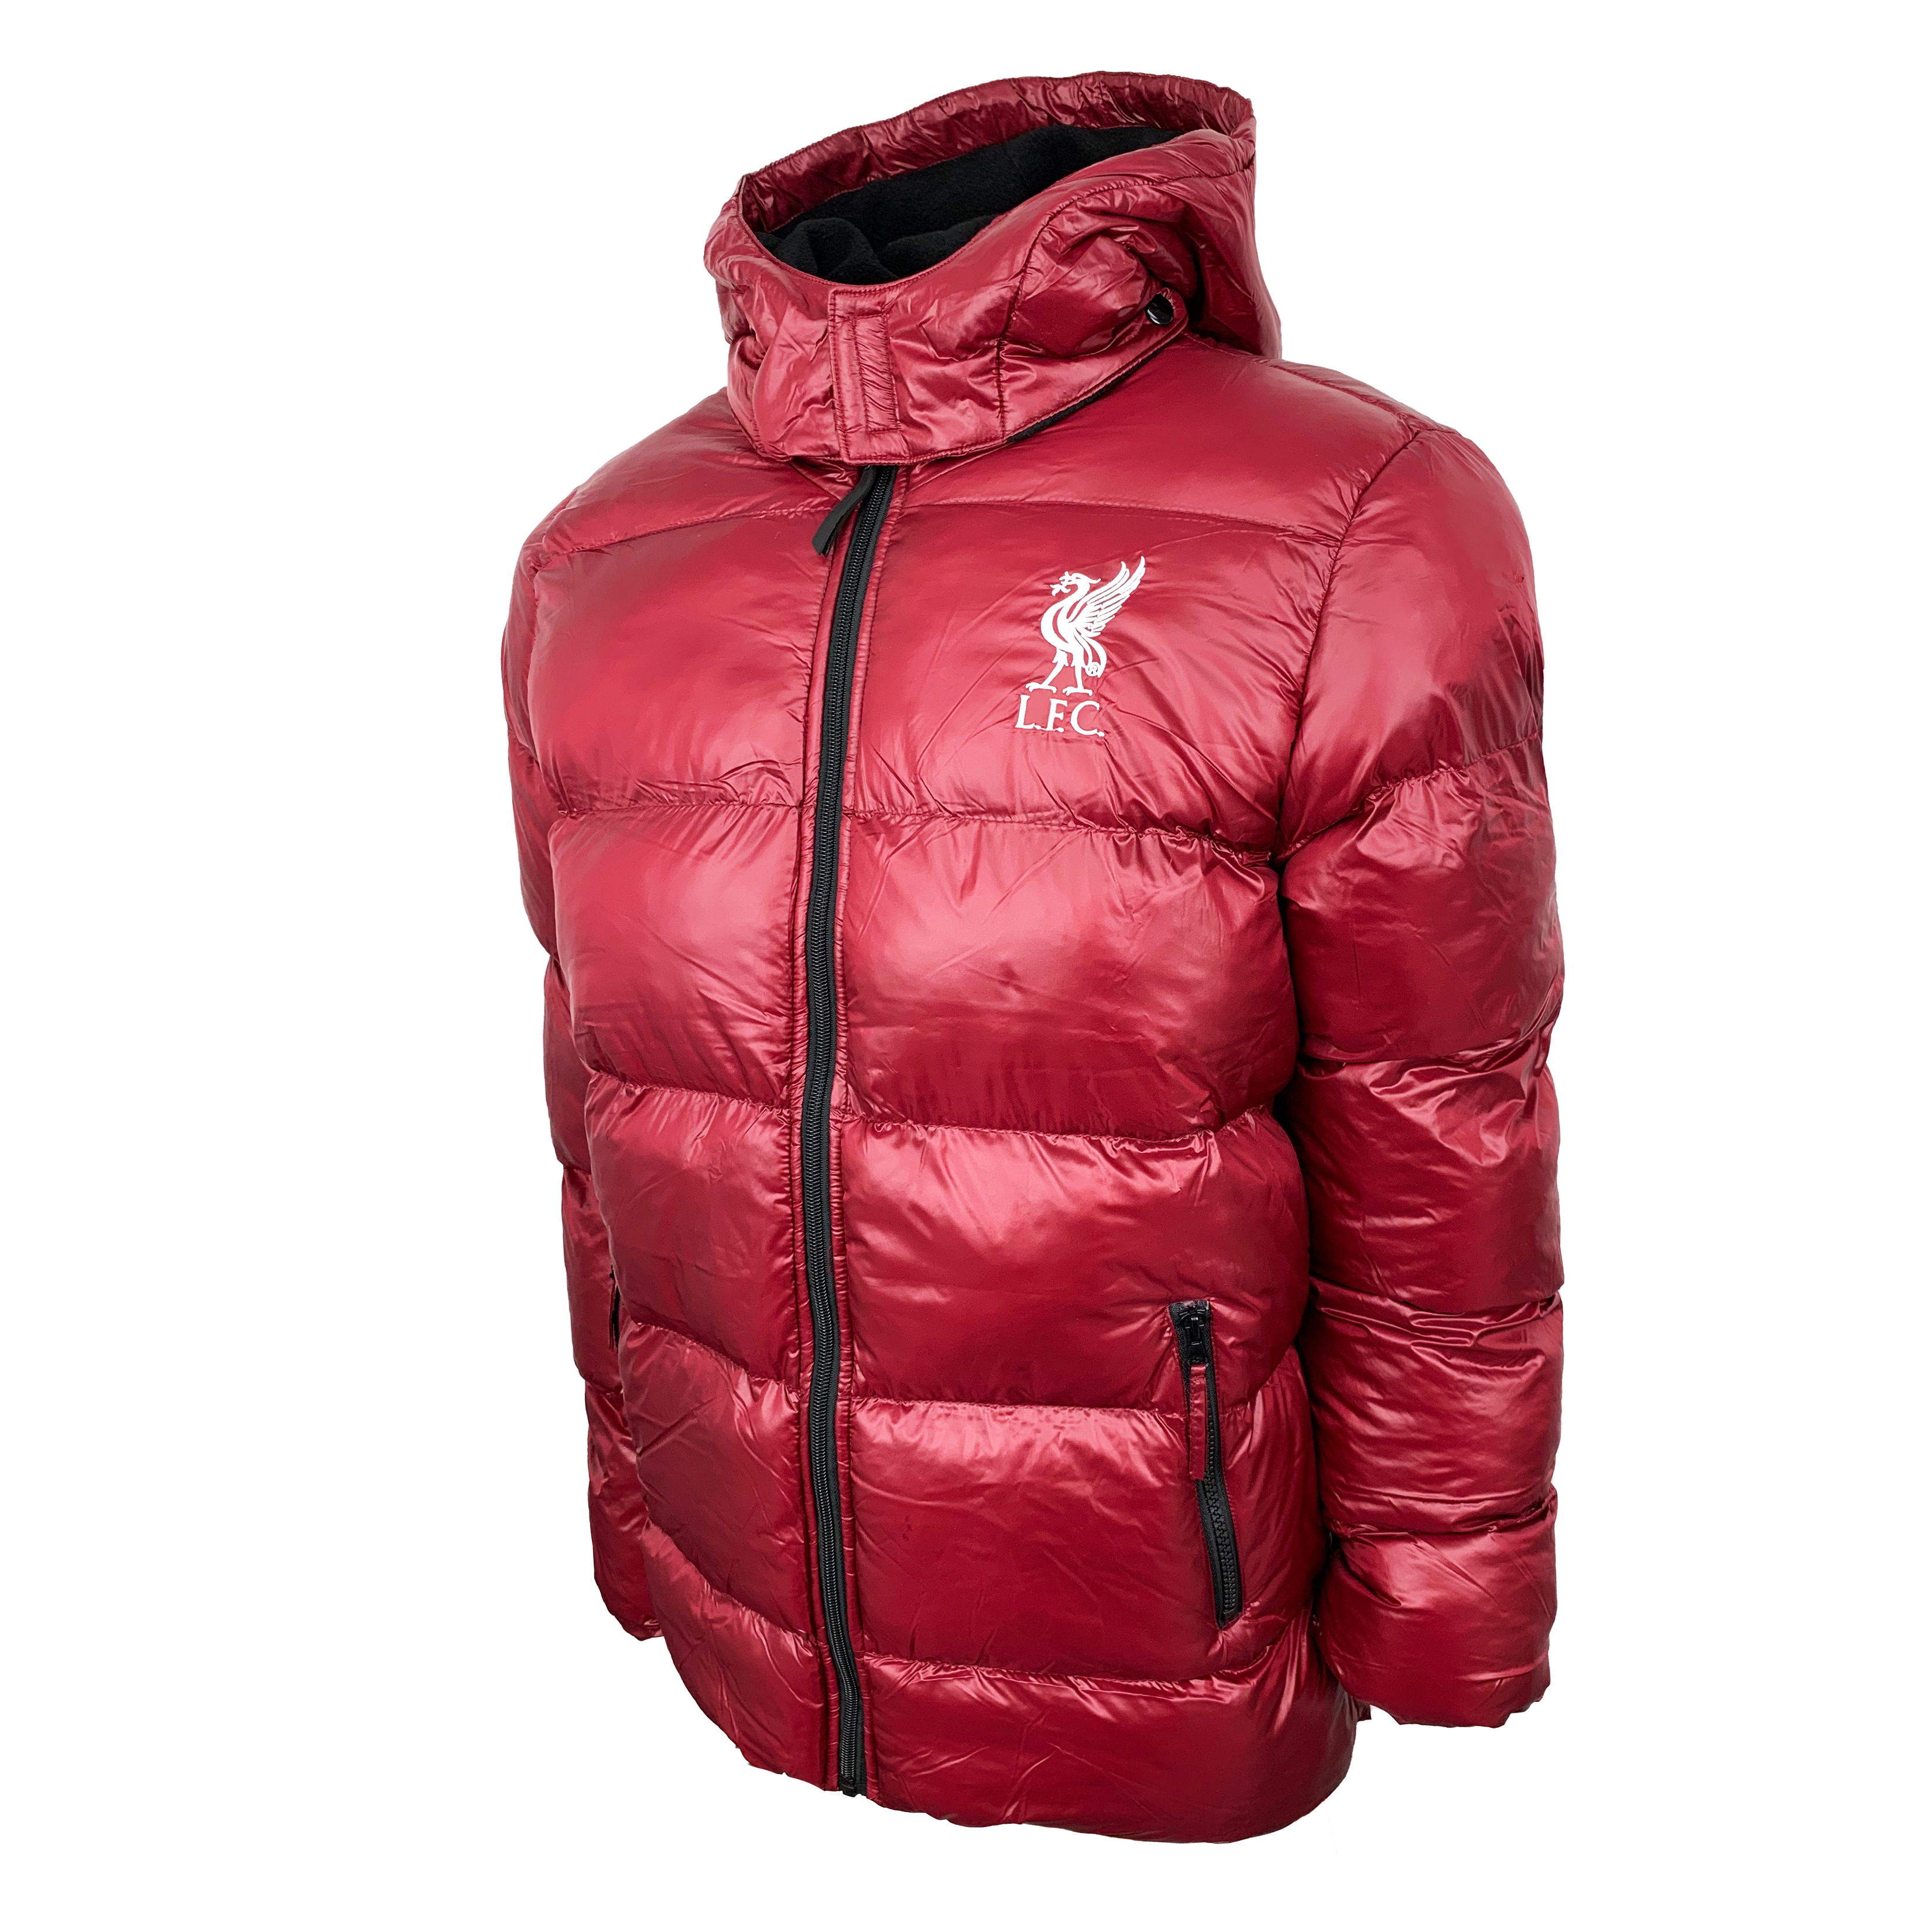 Liverpool Winter Jacket, With Removable Hood, Licensed Liverpool Puffer Jacket (YL) - image 1 of 5